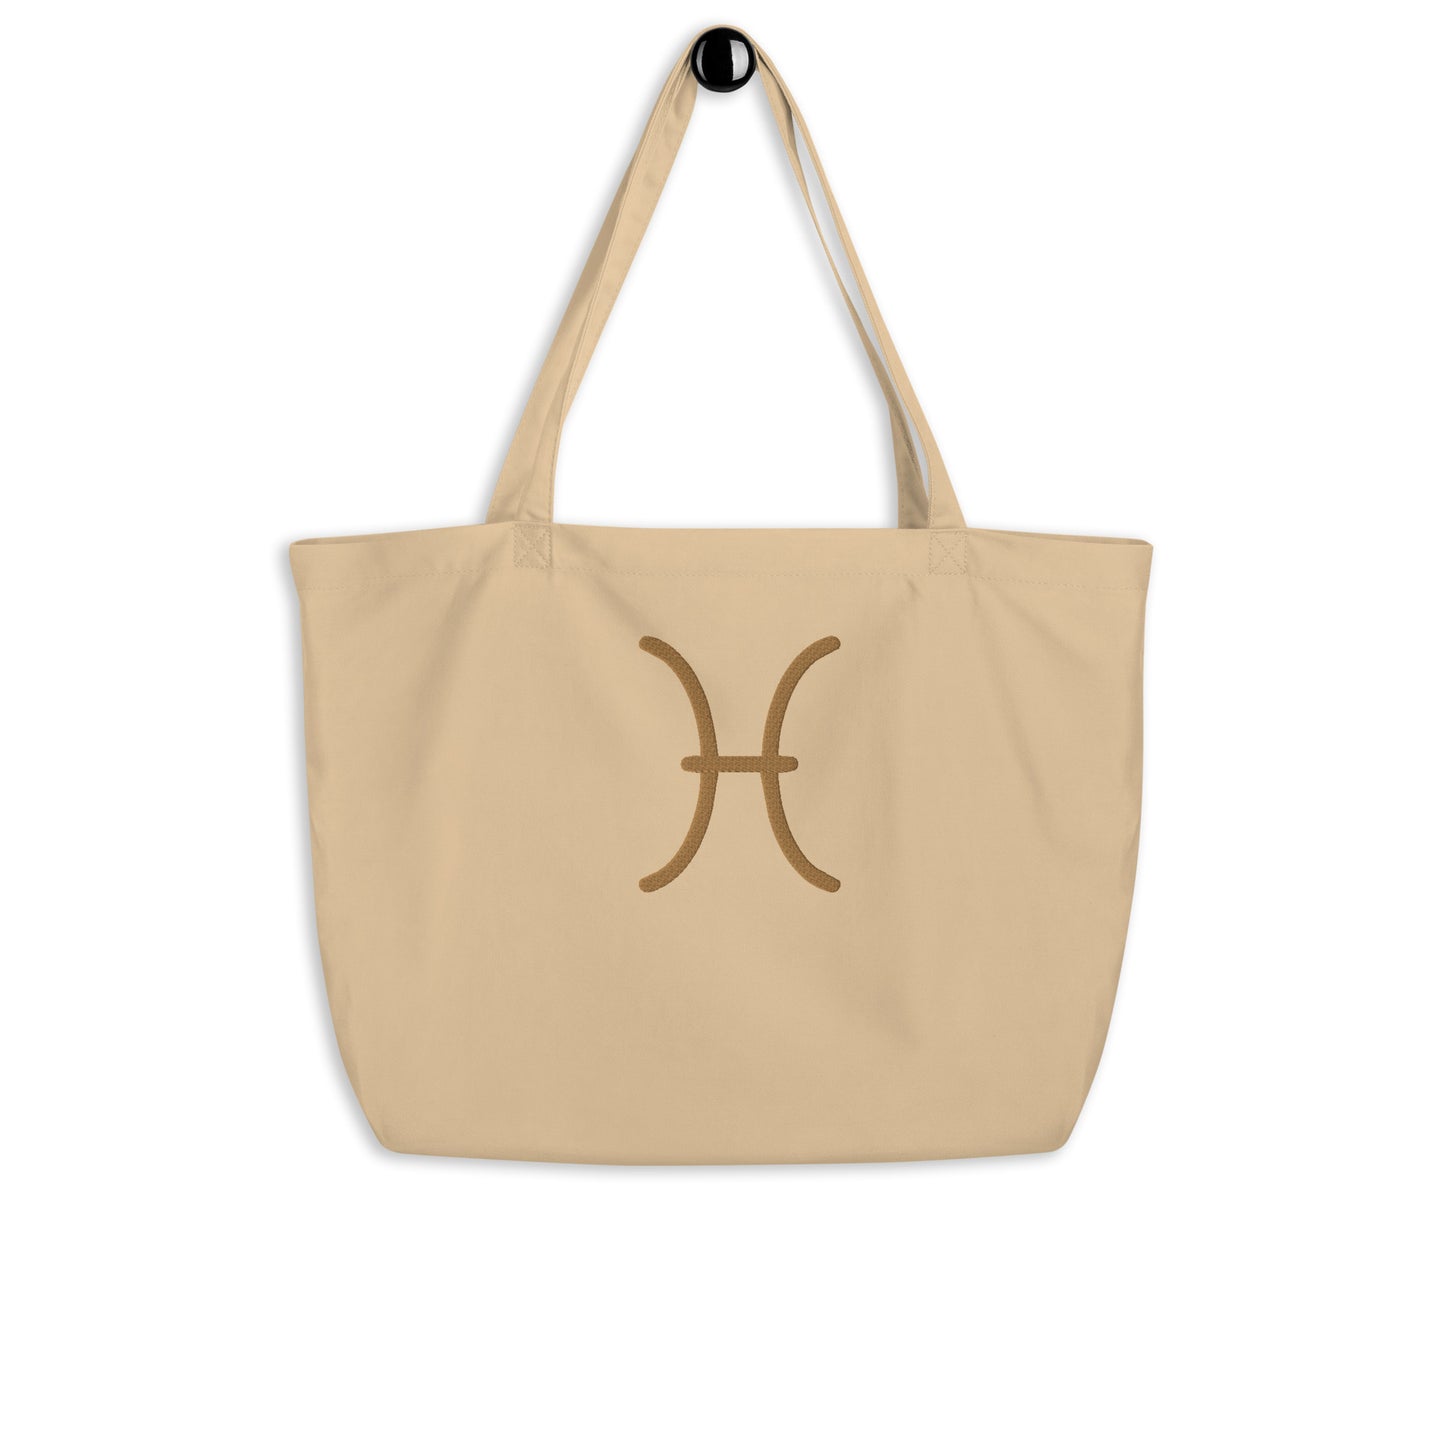 Pisces - Large Open Tote Bag - Gold Thread